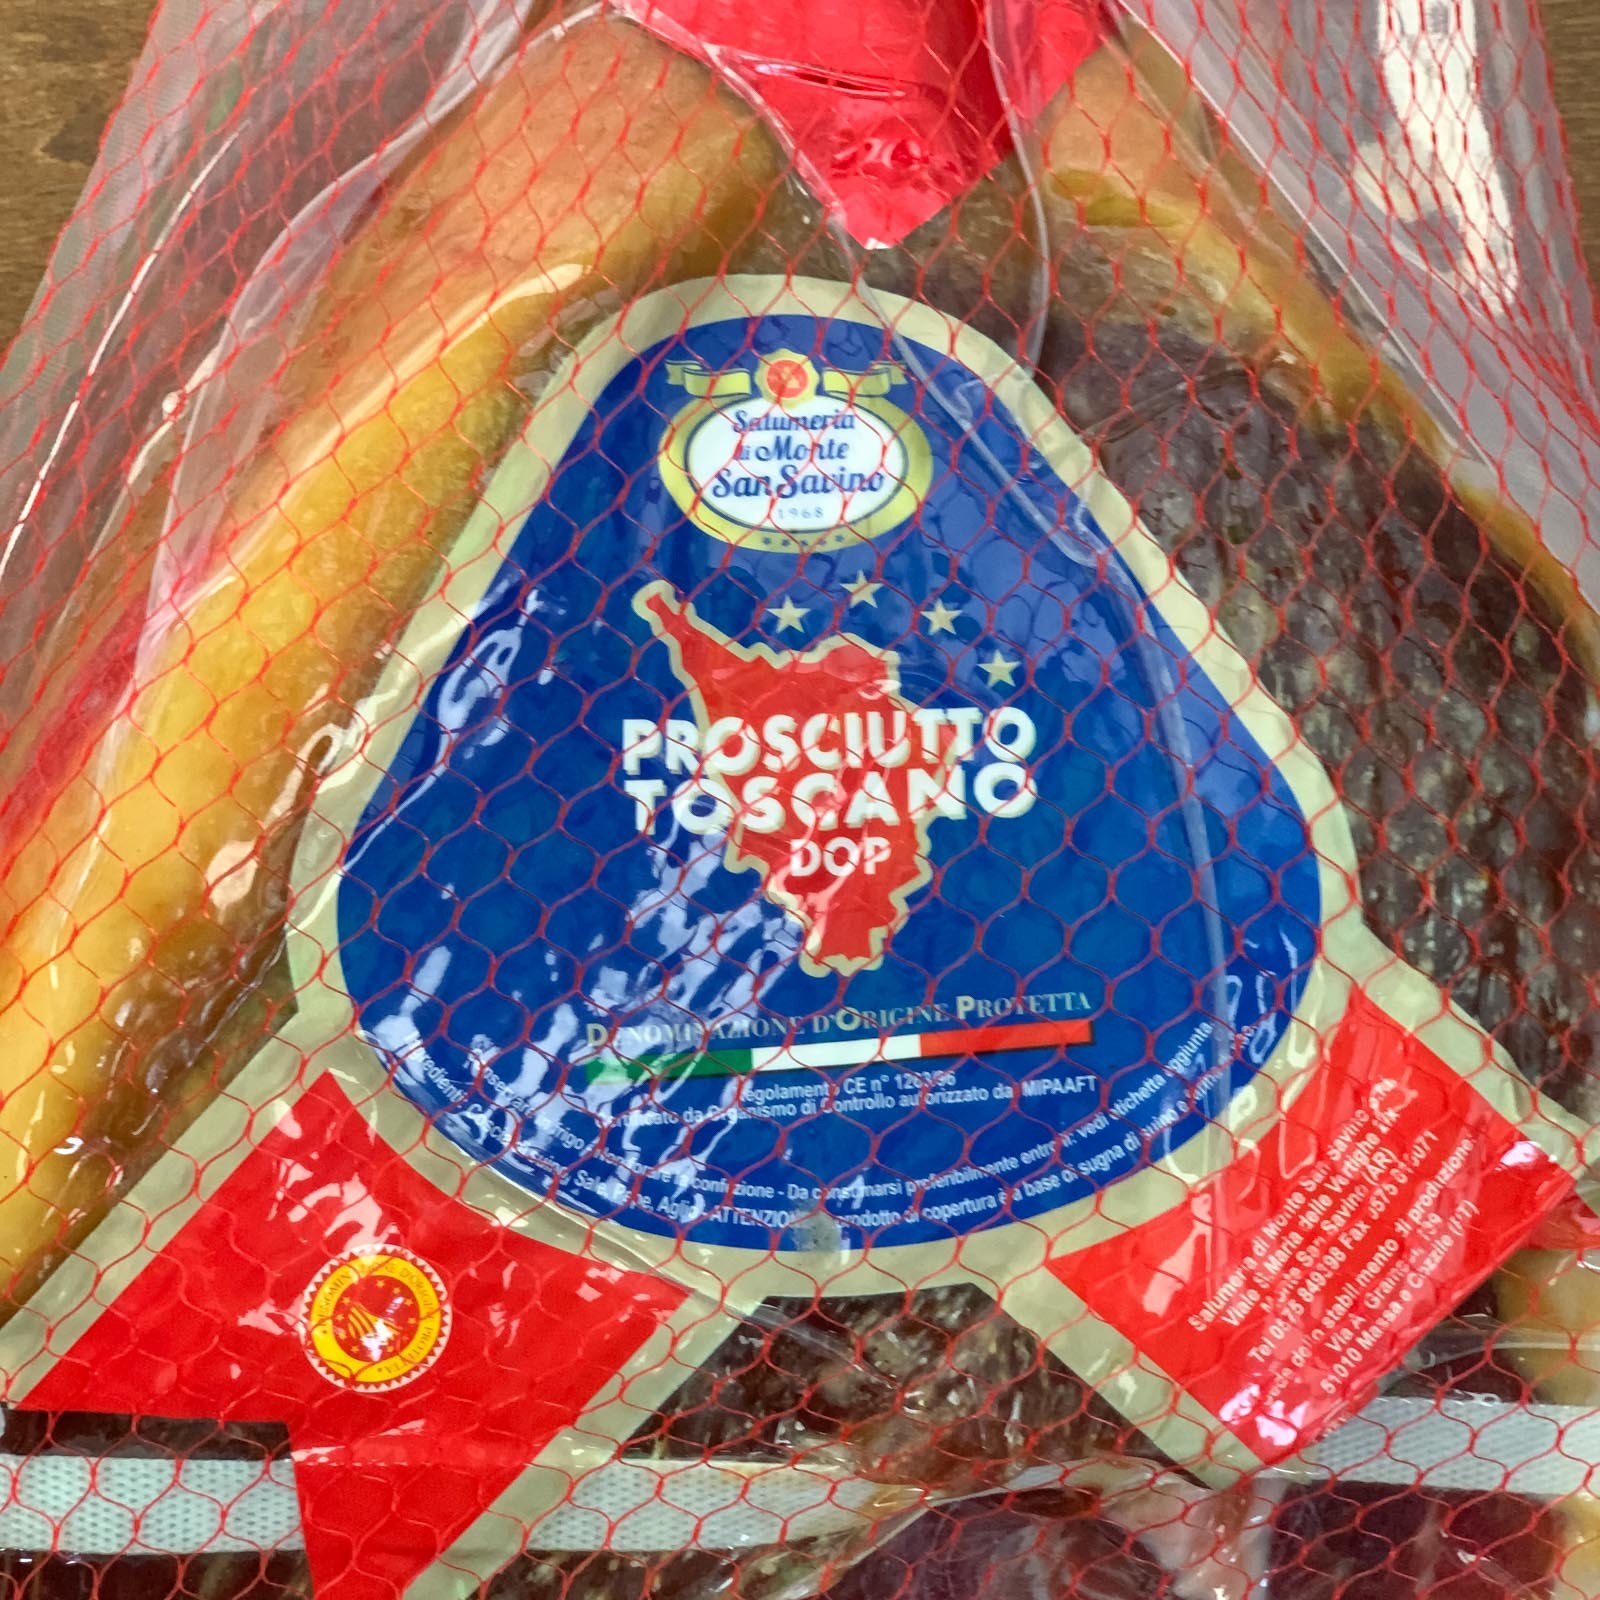 Tuscan Ham PDO (Prosciutto) - Decoration Packaging, is, undoubtedly, one of the most important products when it comes to Tuscan cured meats, both for the quality of the raw materials used for its creation and conservation, but above all for its intense taste and slightly savory able to delight the palate of adults and children both alone and accompanied with other local products or a simple slice of fresh bread. Furthermore, the Protected Designation of Origin guarantees its quality and characteristic aroma.